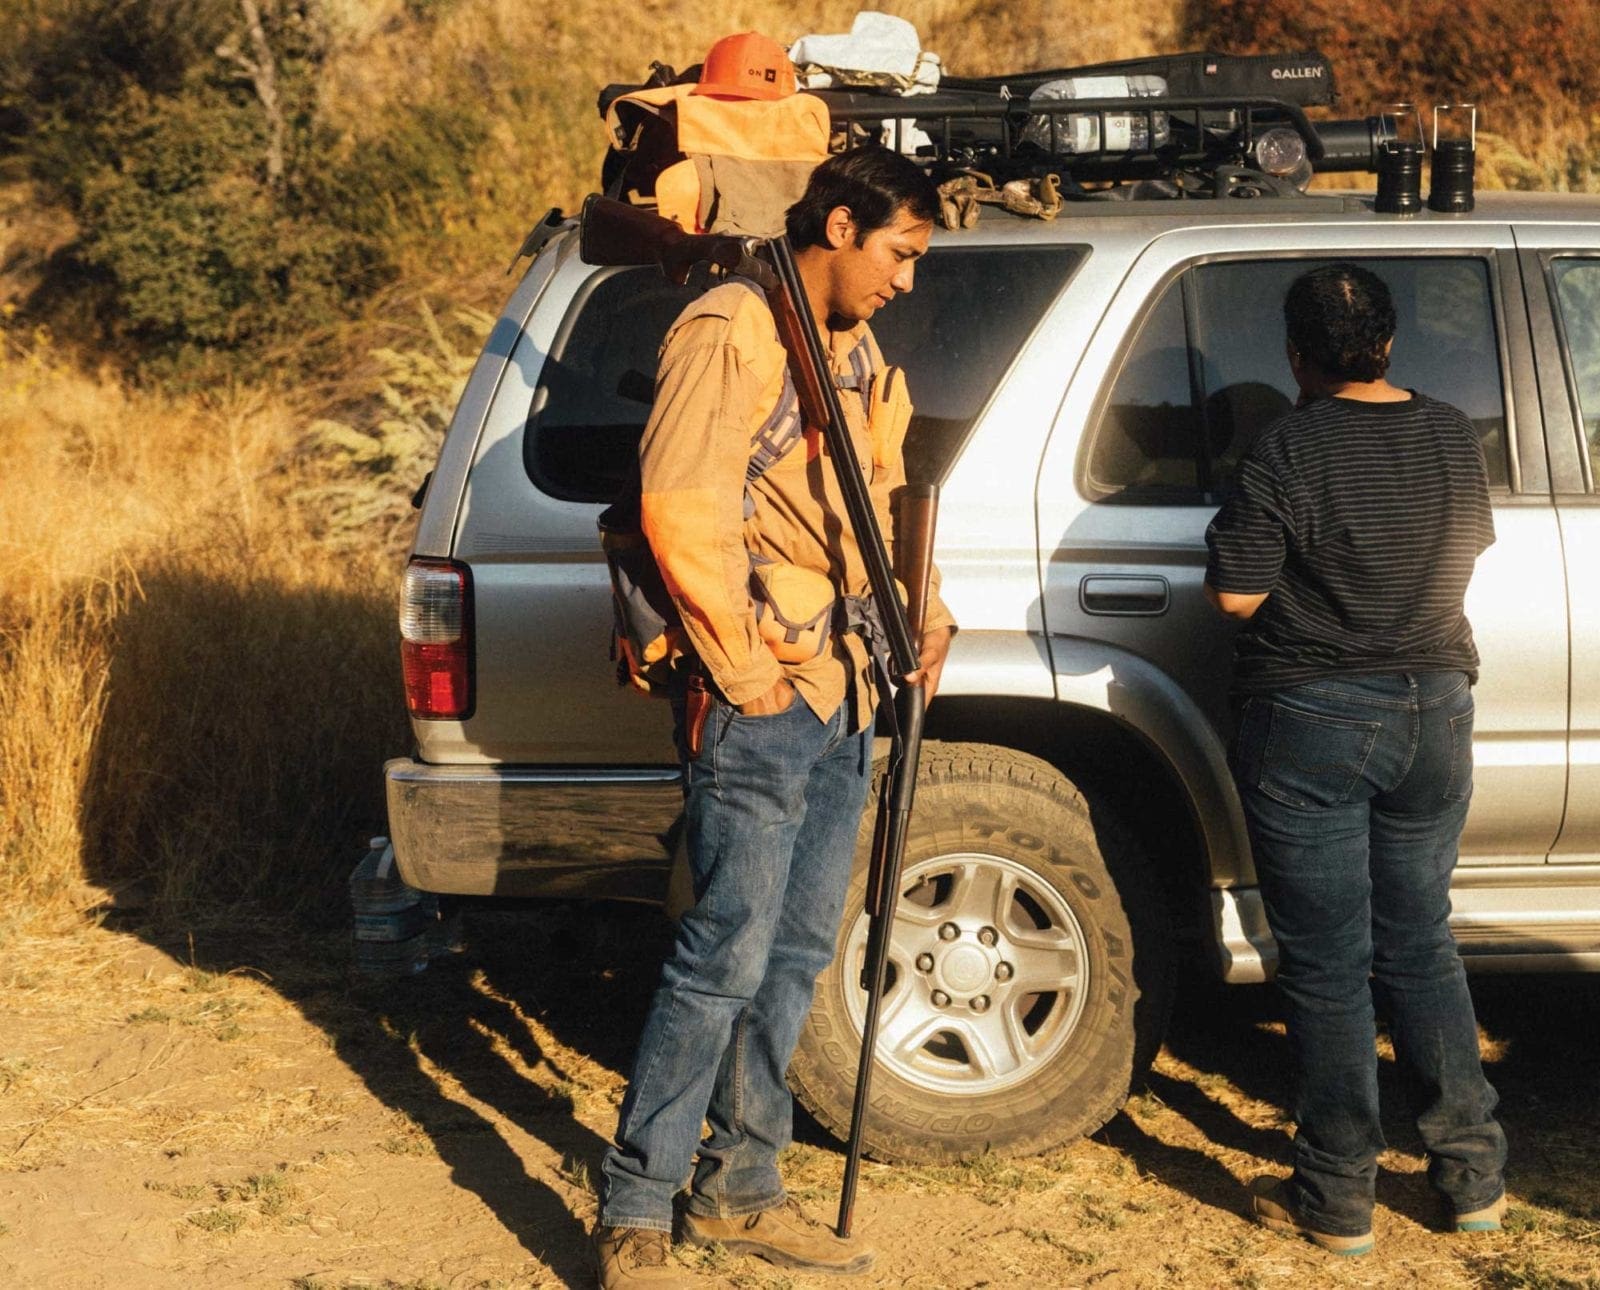 Two bird hunters get ready at a truck to go hunt quail in California.